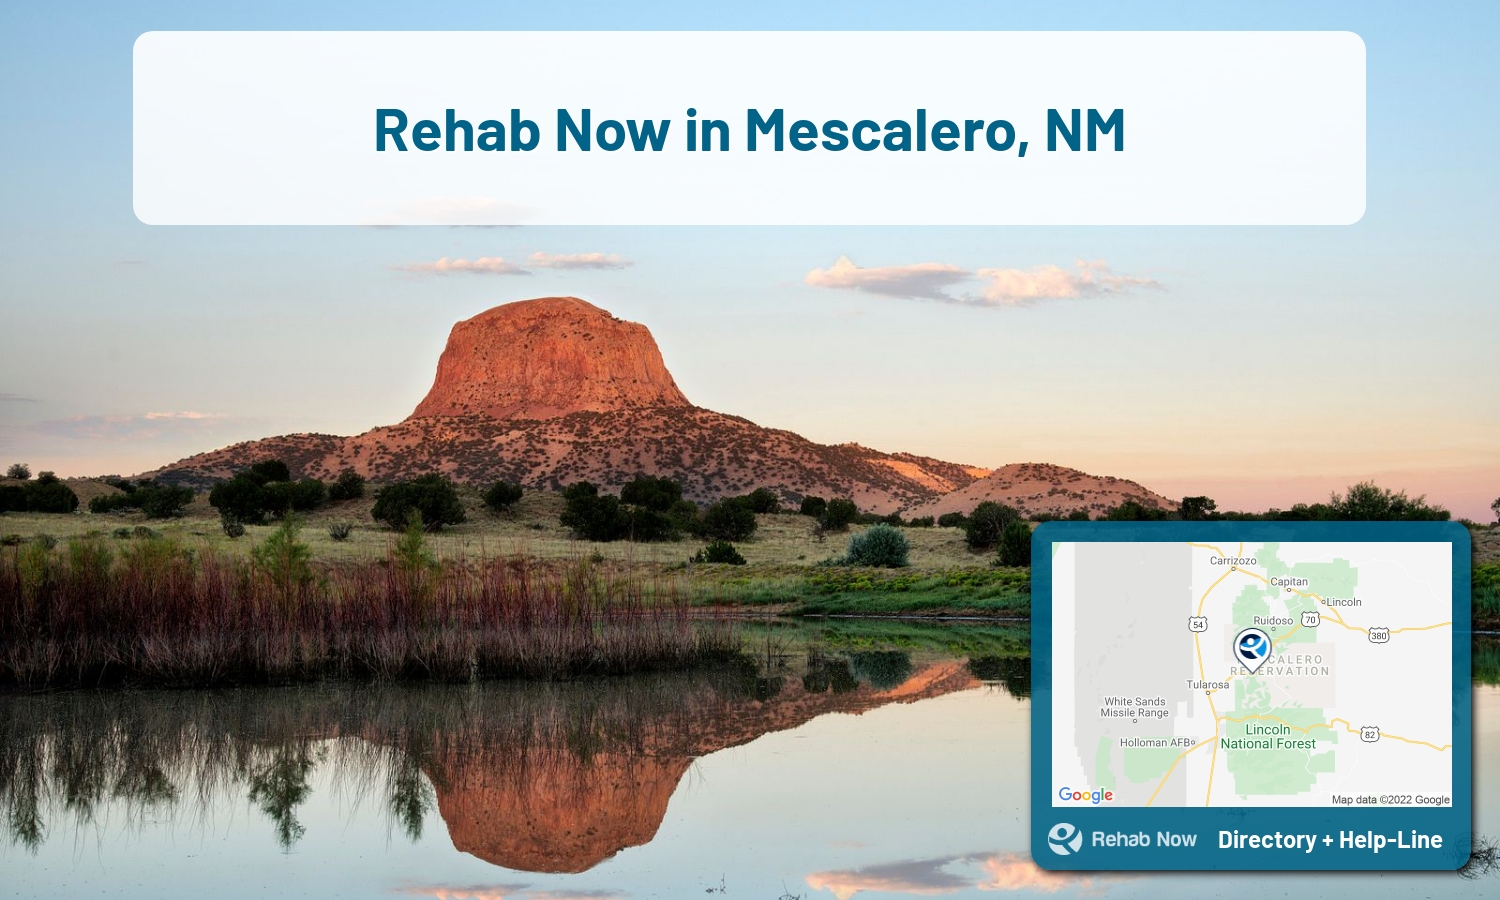 Mescalero, NM Treatment Centers. Find drug rehab in Mescalero, New Mexico, or detox and treatment programs. Get the right help now!